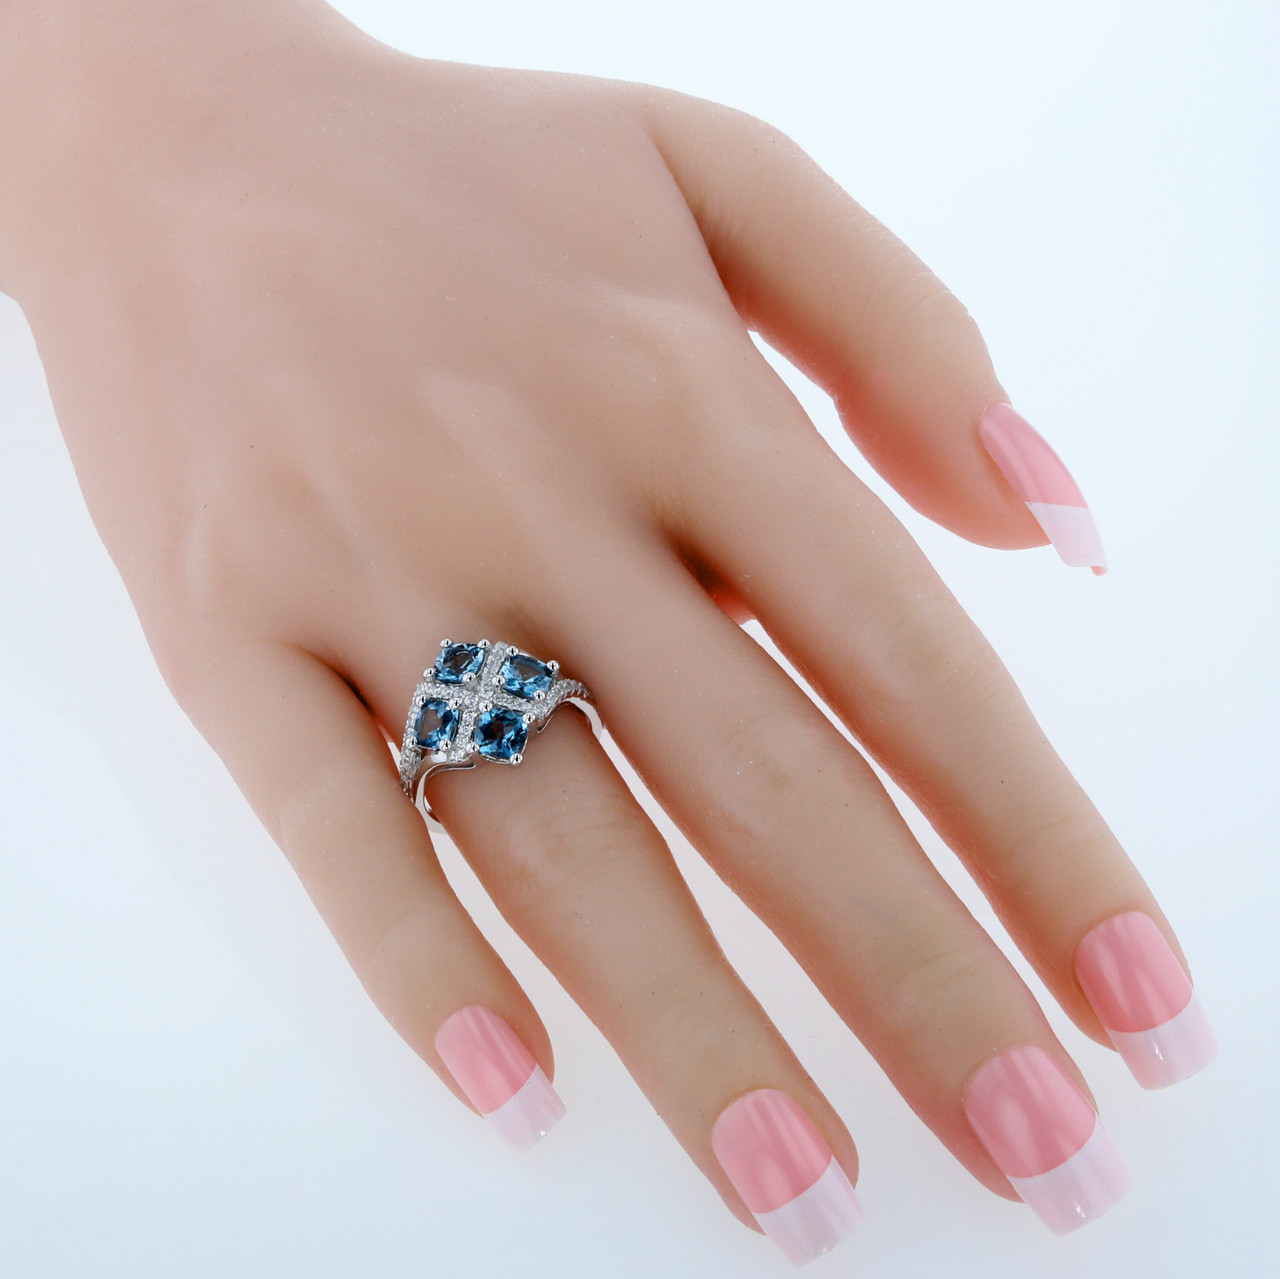 Peora Enchanting 0.50 Carats London Blue Topaz Ring in Sterling Silver Sizes 5 to 9 